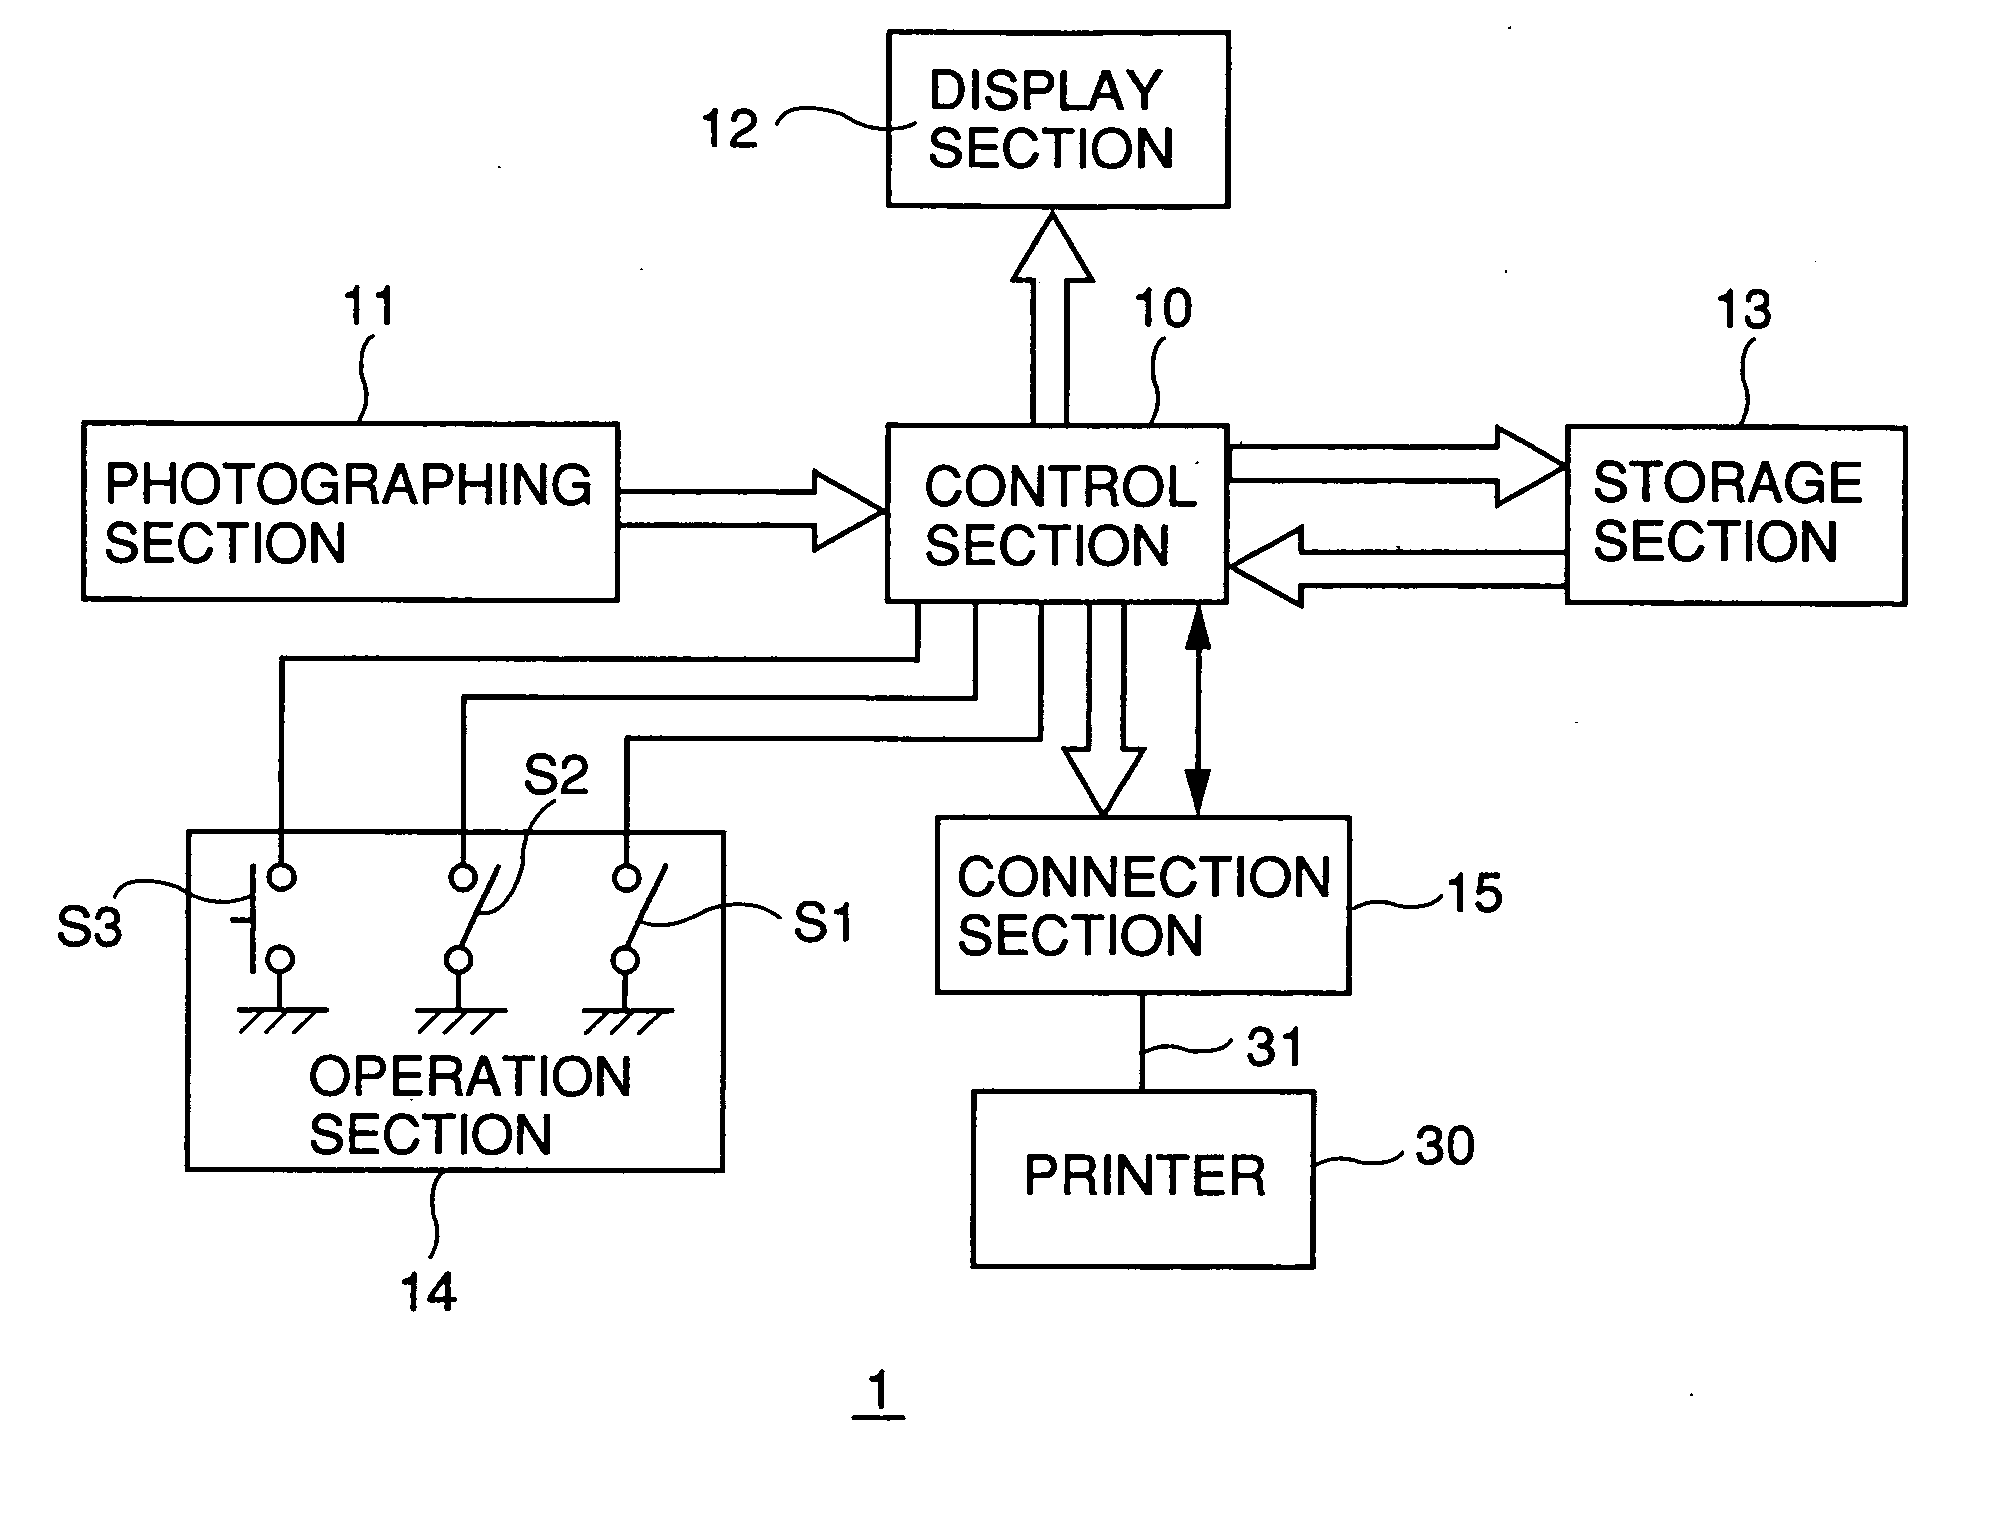 Digital camera with automatic operating mode selection